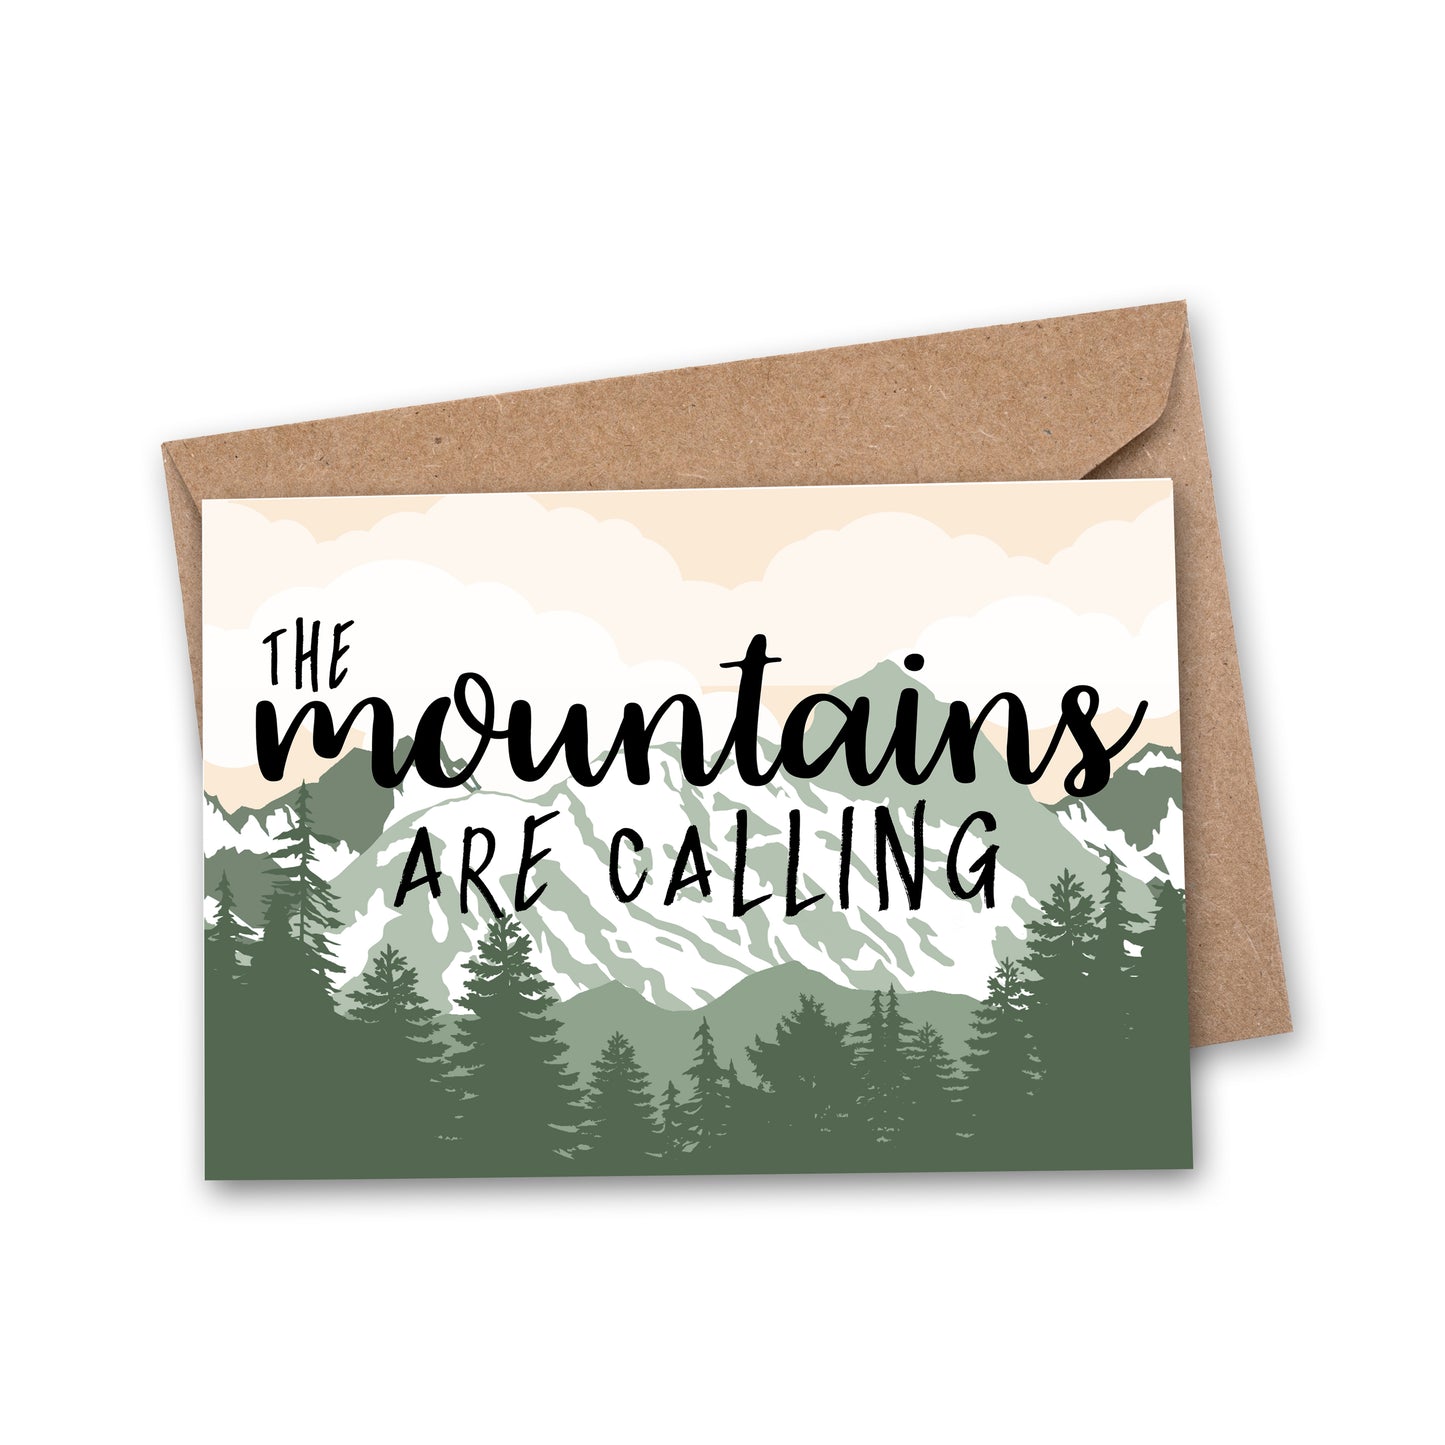 the mountains are calling quote printed on illustration of mountains and forest. 